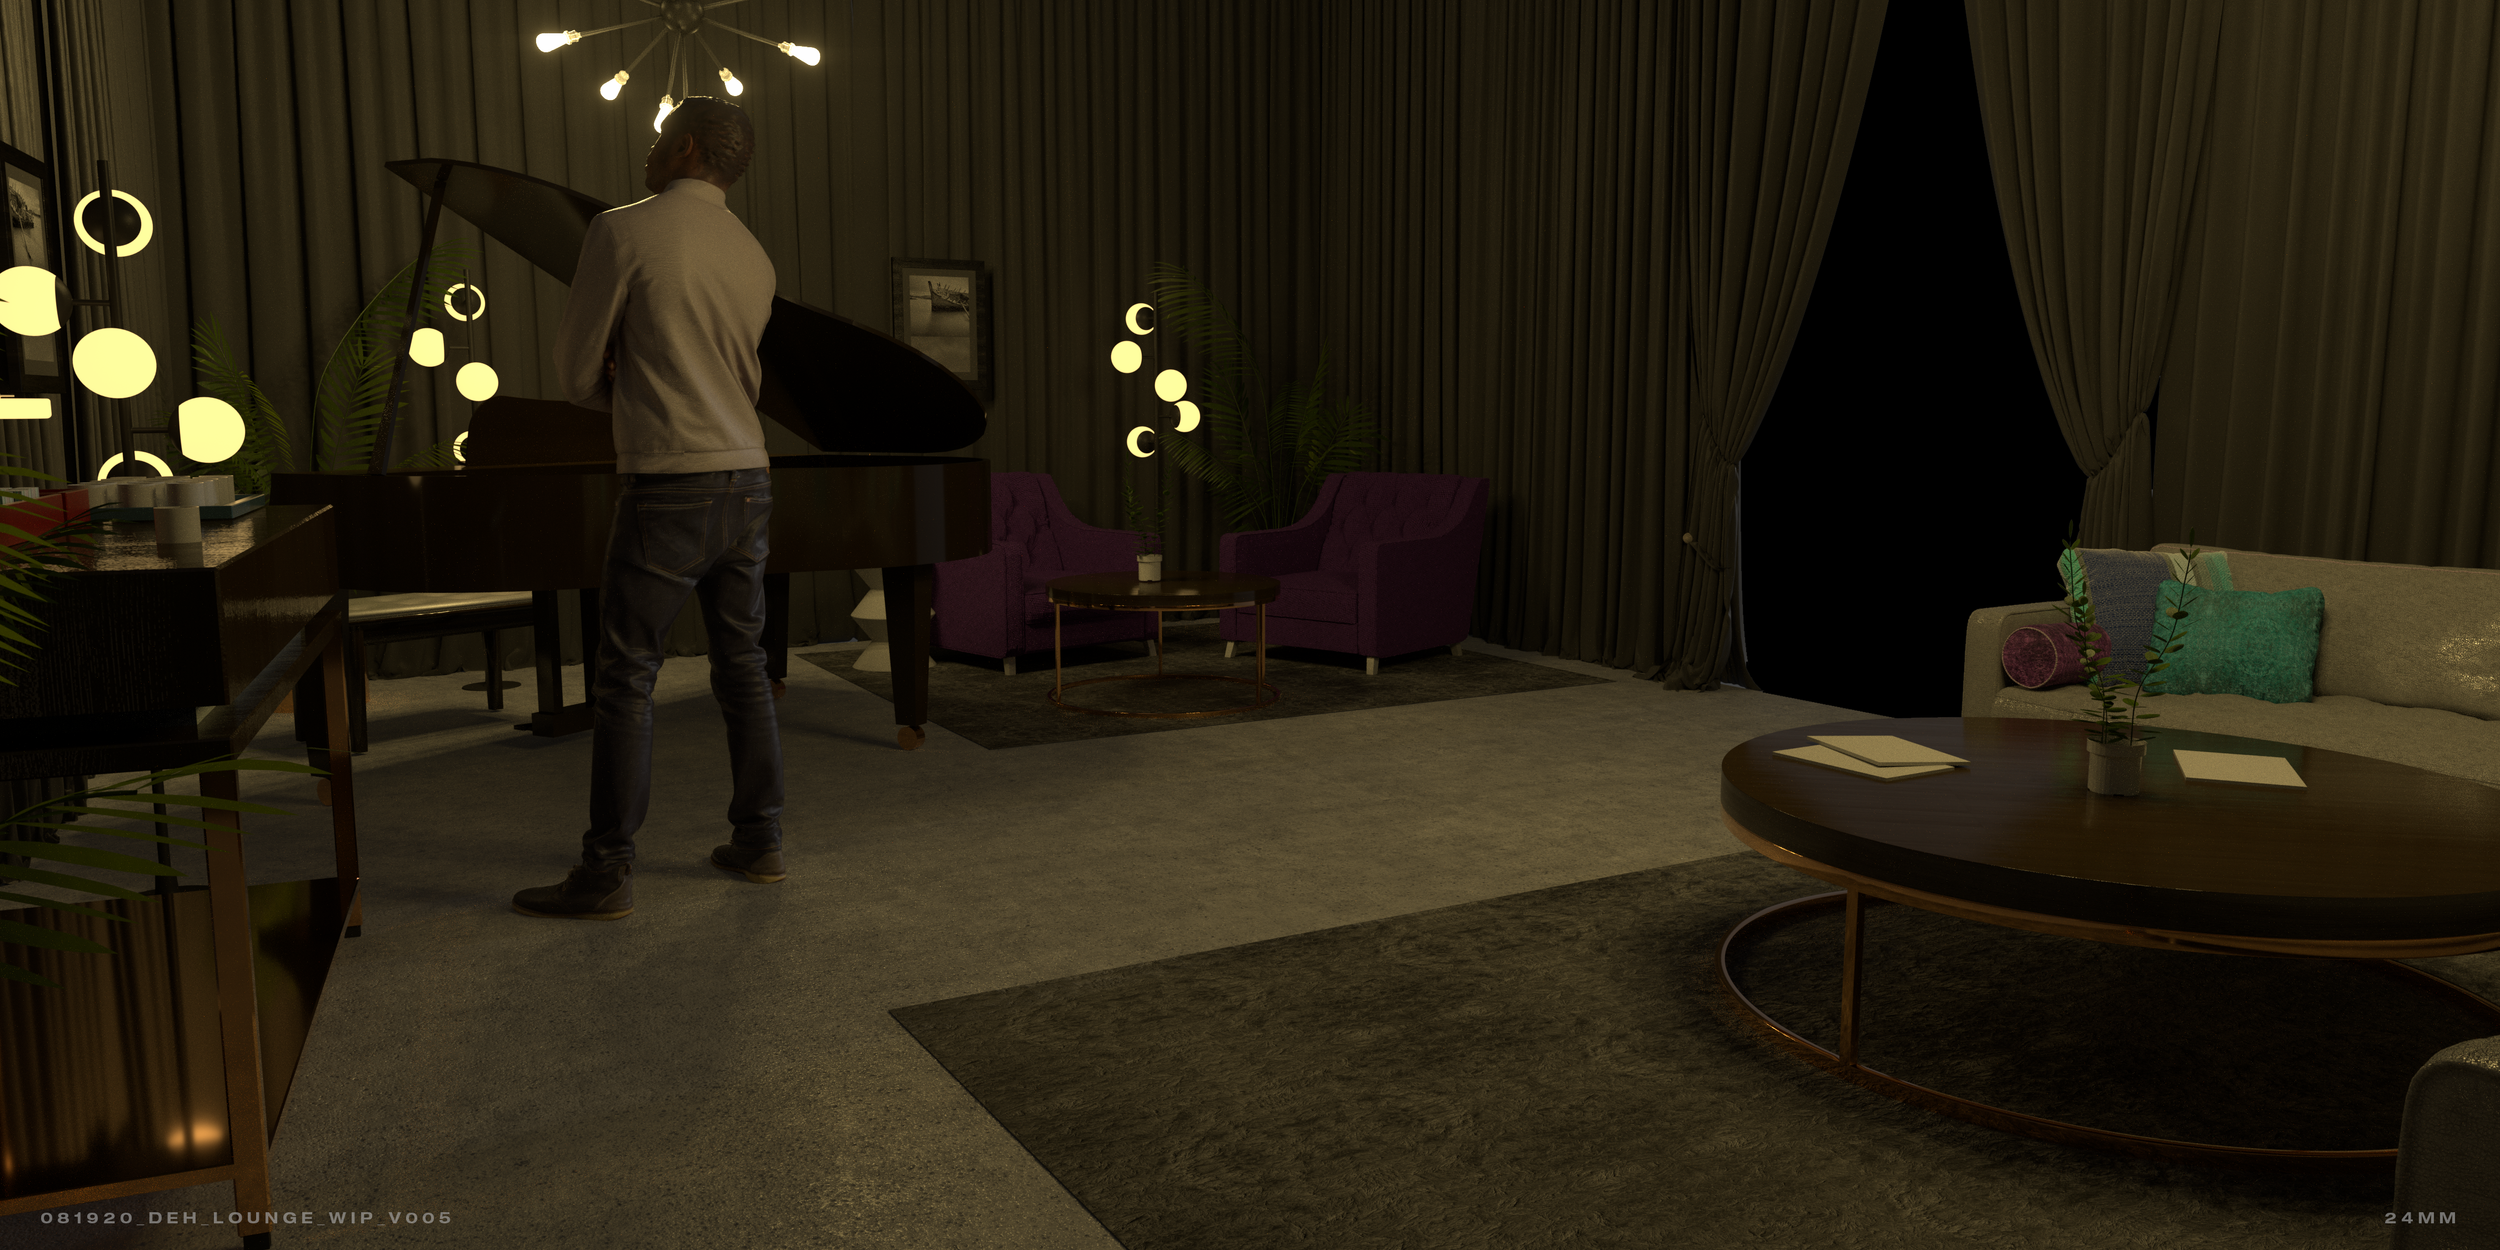 081920_DEH_LOUNGE_WIP_V005.png